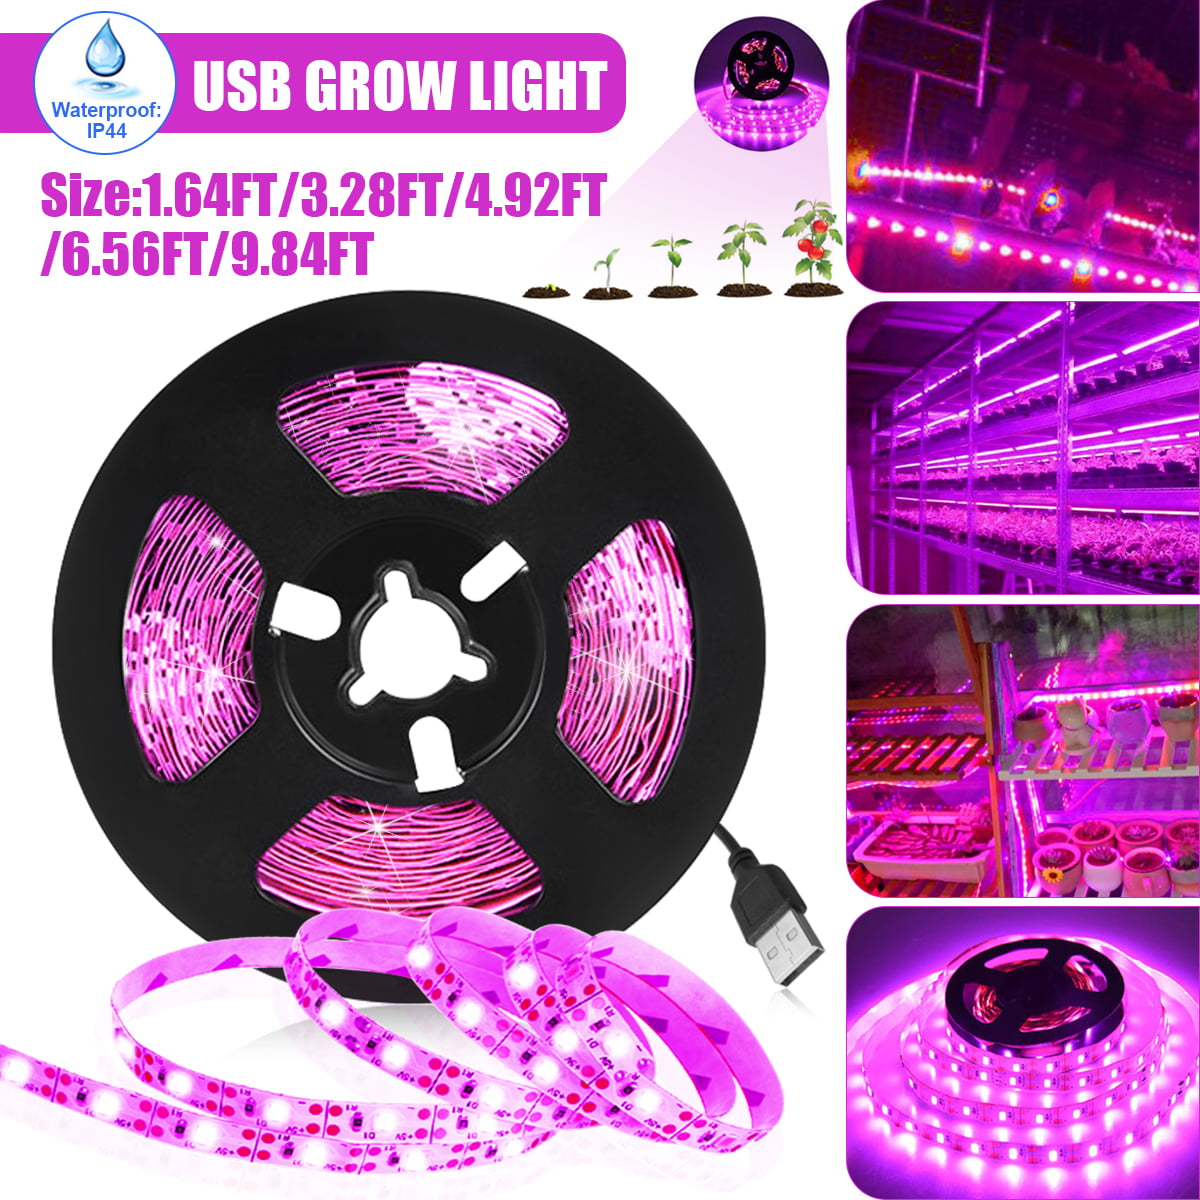 Details about   LED USB Grow Light Full Spectrum SMD 2835 Indoor Plant Flower Growing Strip Lamp